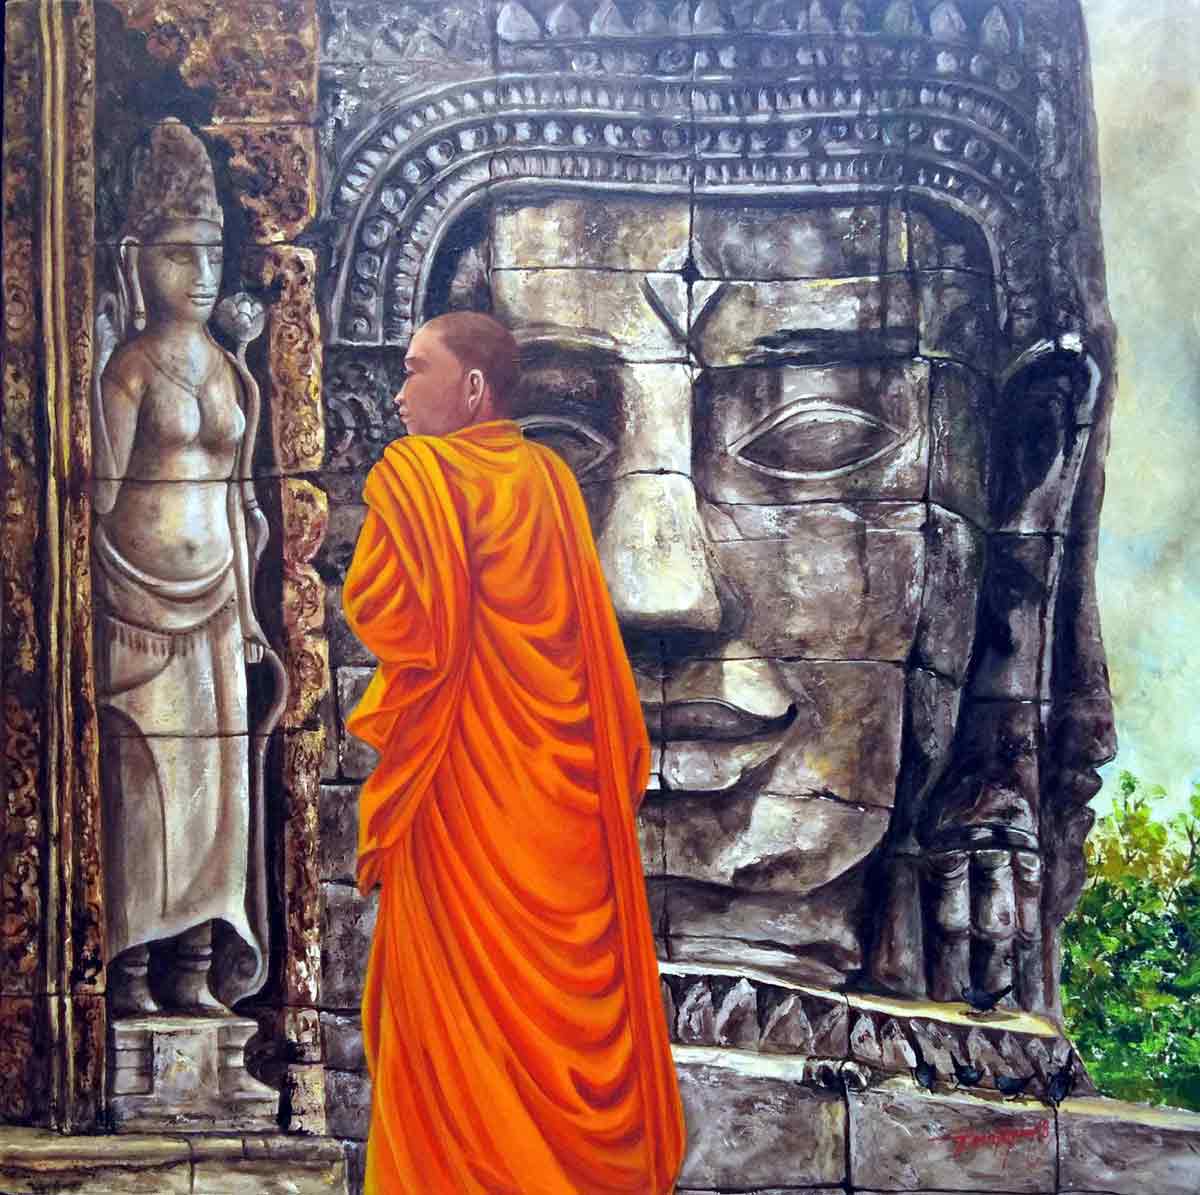 Realism Painting with Acrylic on Canvas "Angkor Wat - 3" art by Ghanshyam Kashyap